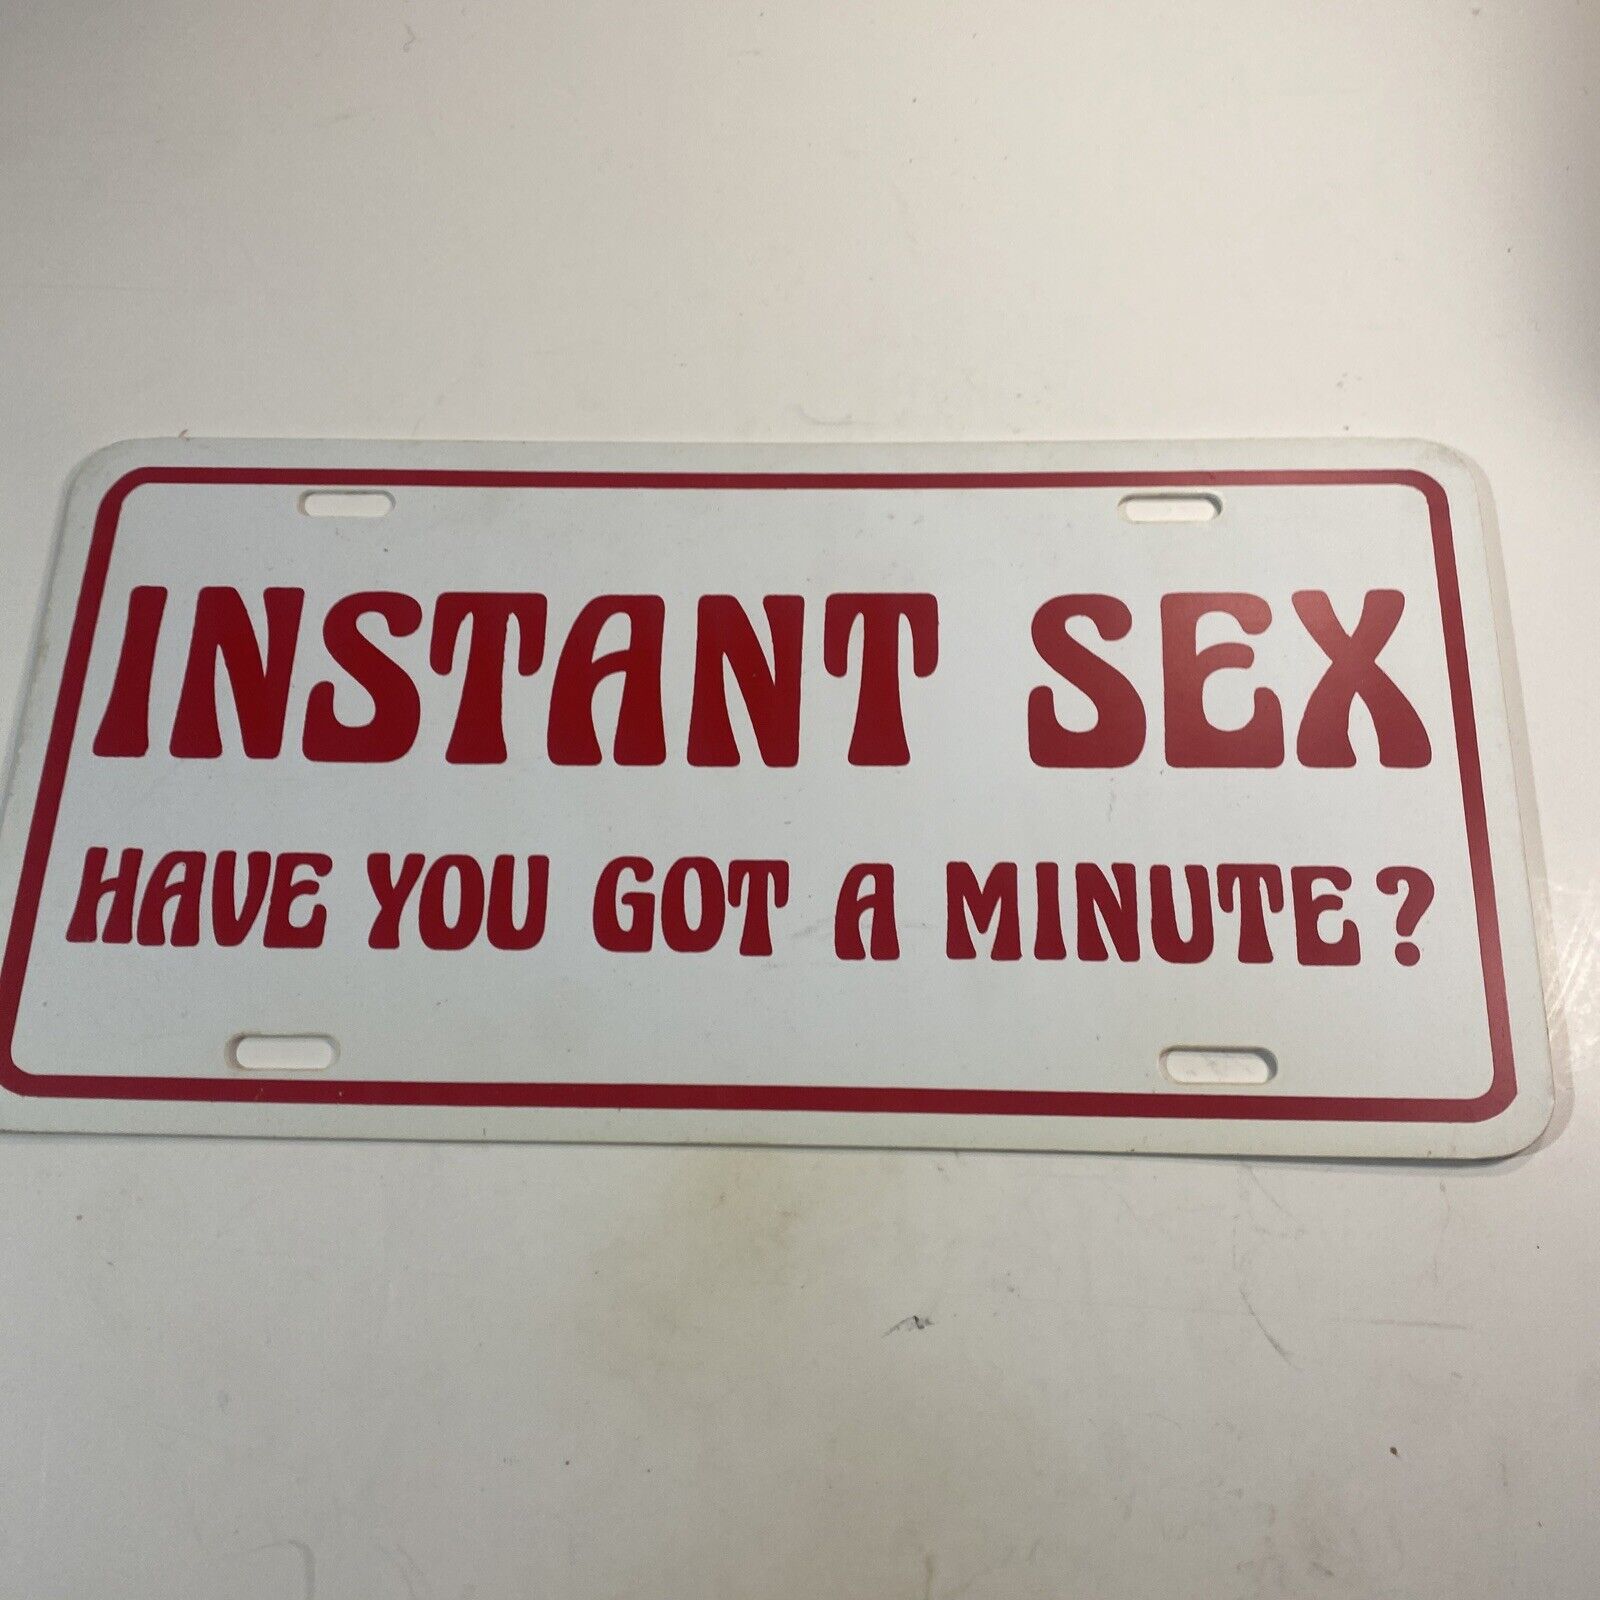 Vtg Humorous Plastic License Plate “INSTANT SEX DO YOU HAVE A MINUTE?”